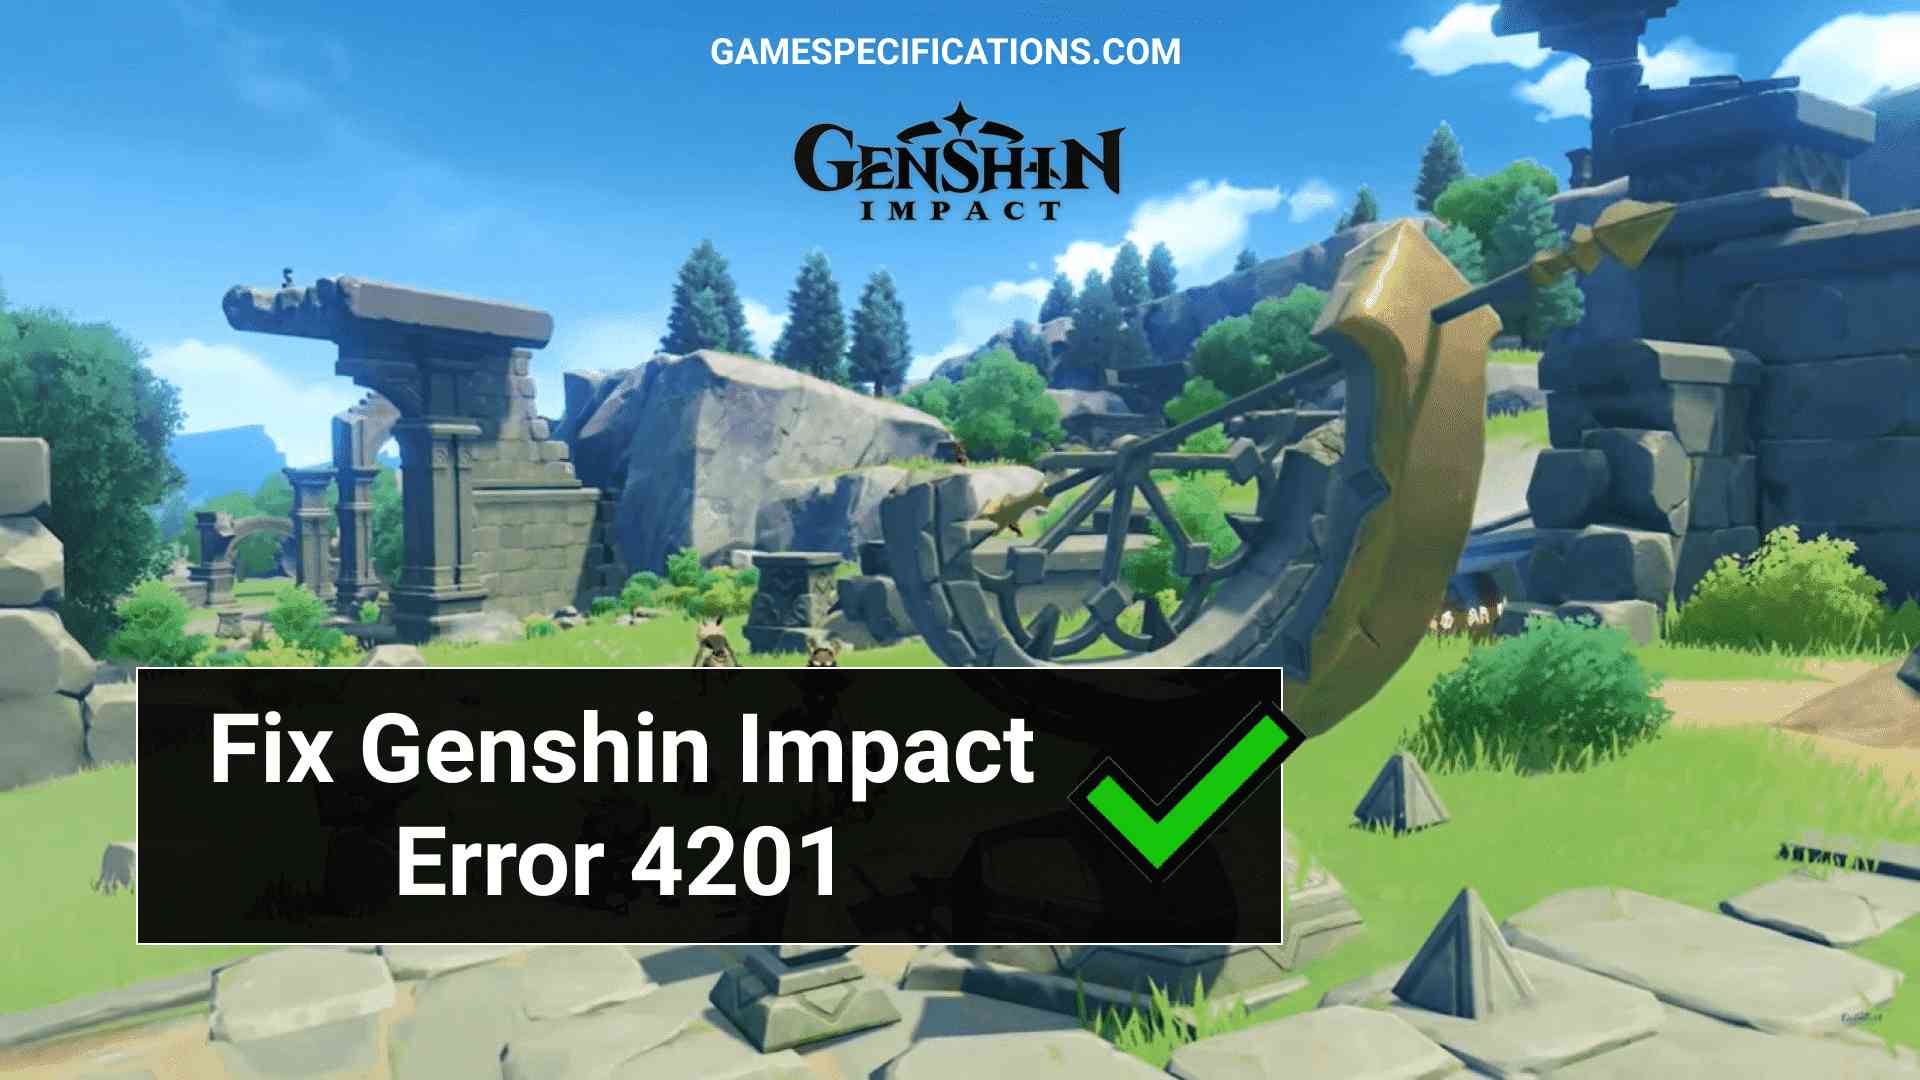 How To Fix Genshin Impact Error 4201 On Computer and Mobile?